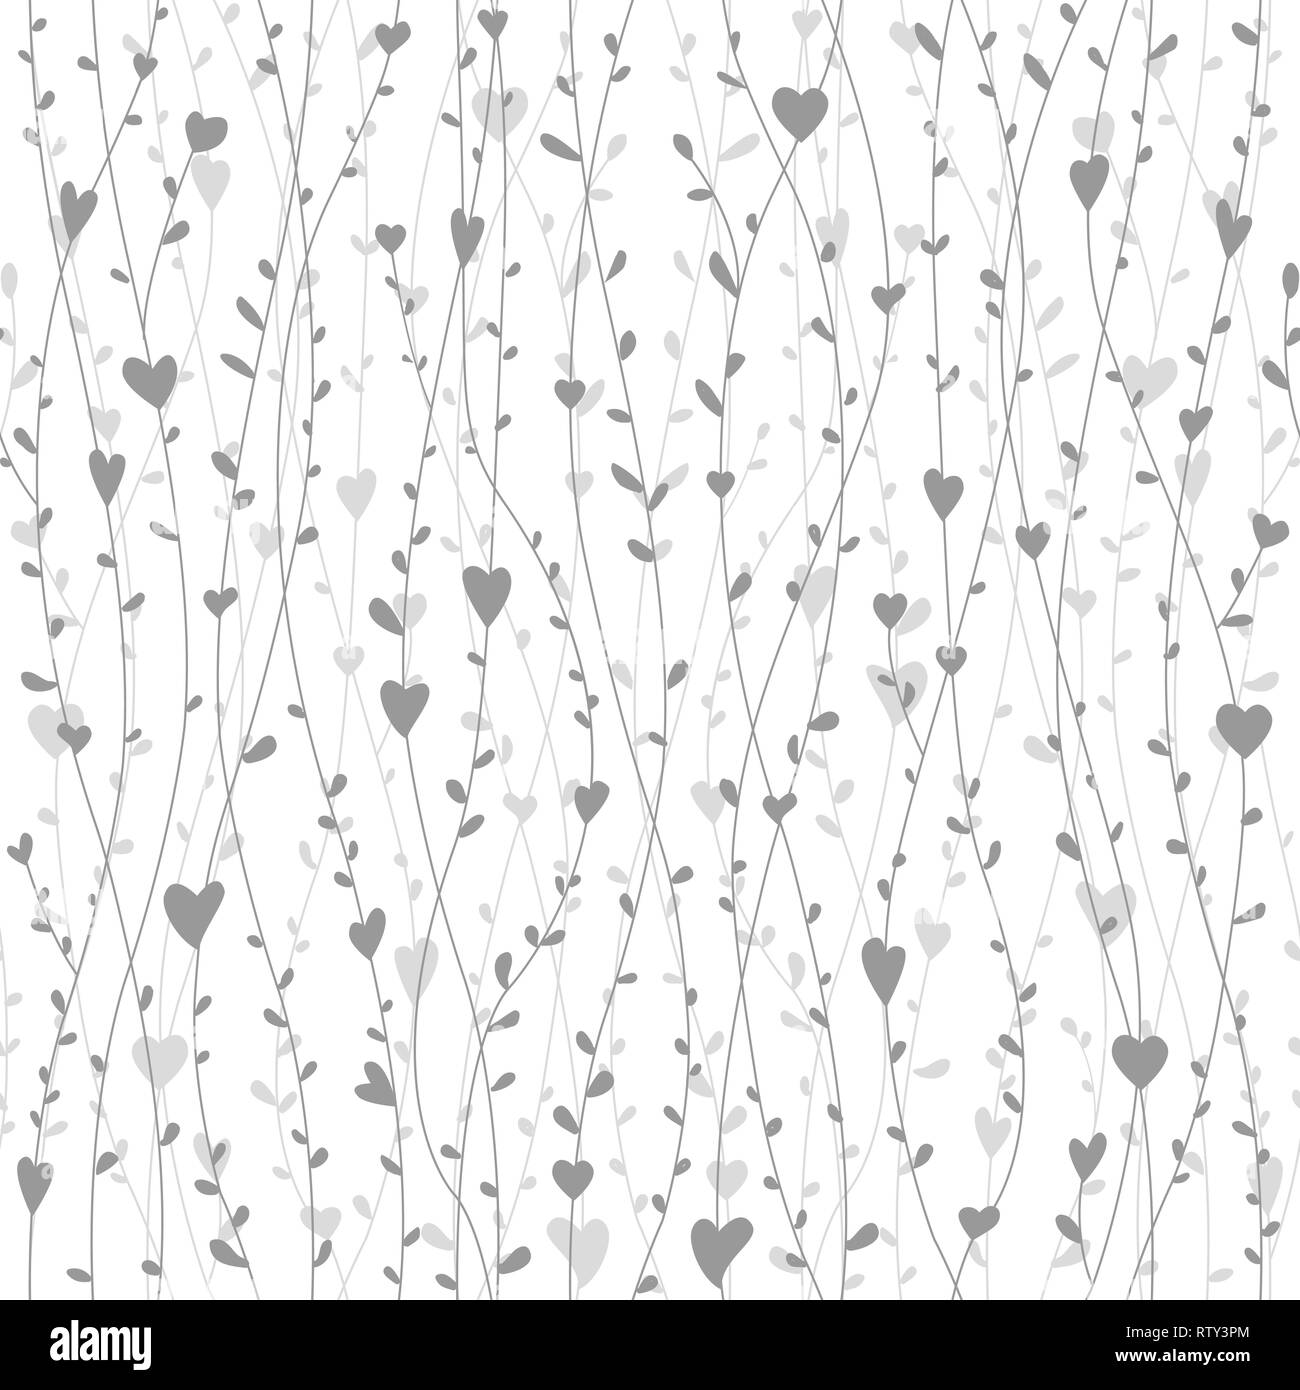 Cute seamless pattern with hearts branches for retro wallpapers, textile prints, bedding, or cards. Vector illustration Stock Vector